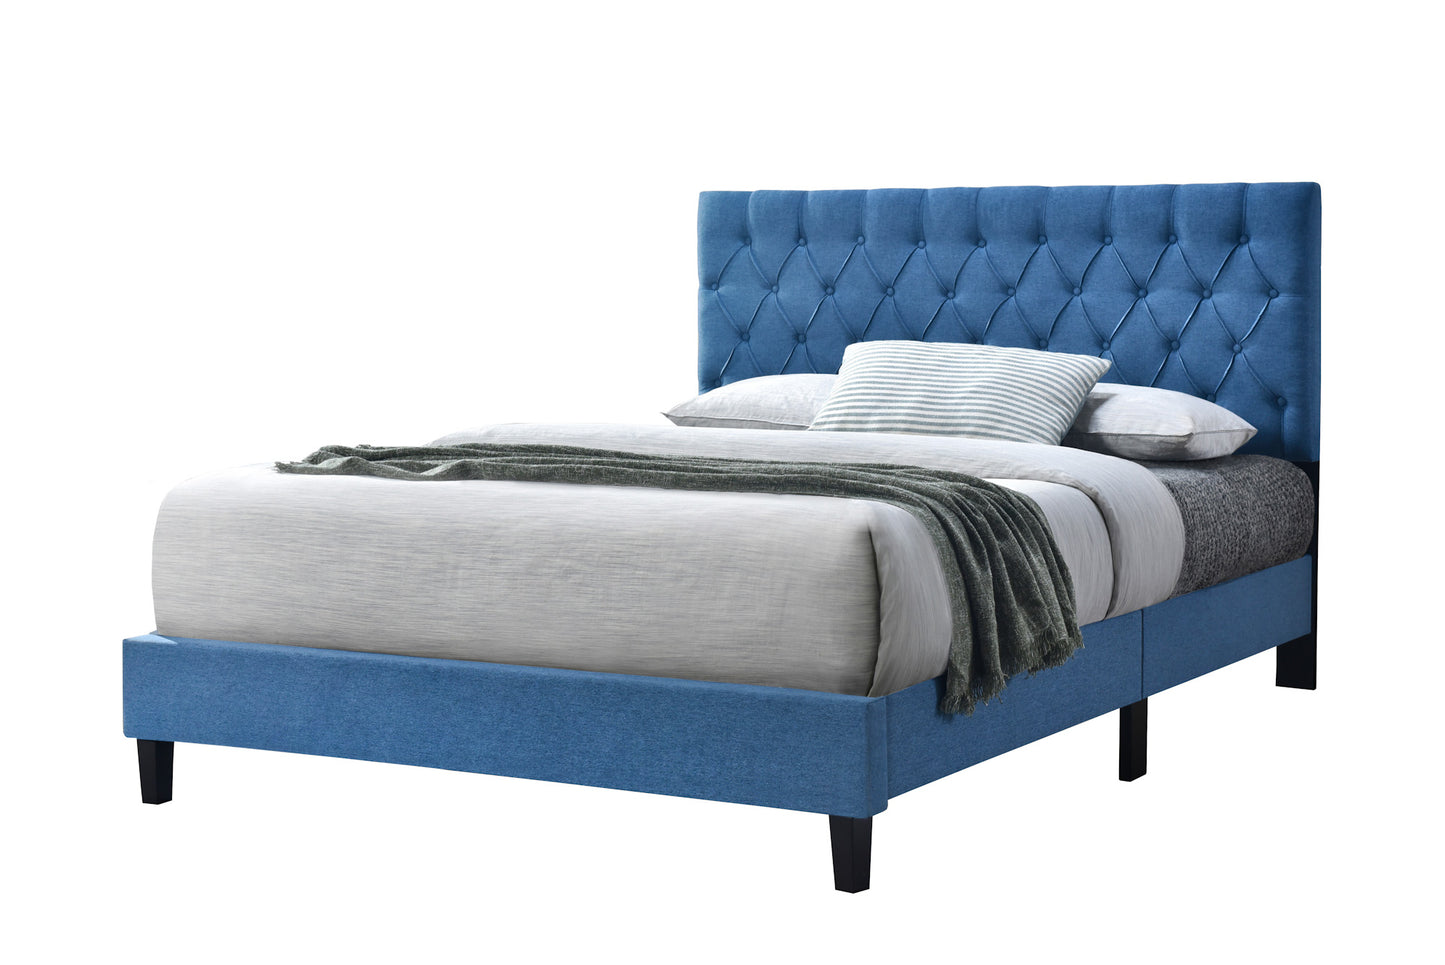 New York Bed (Queen) (Fabric Blue)